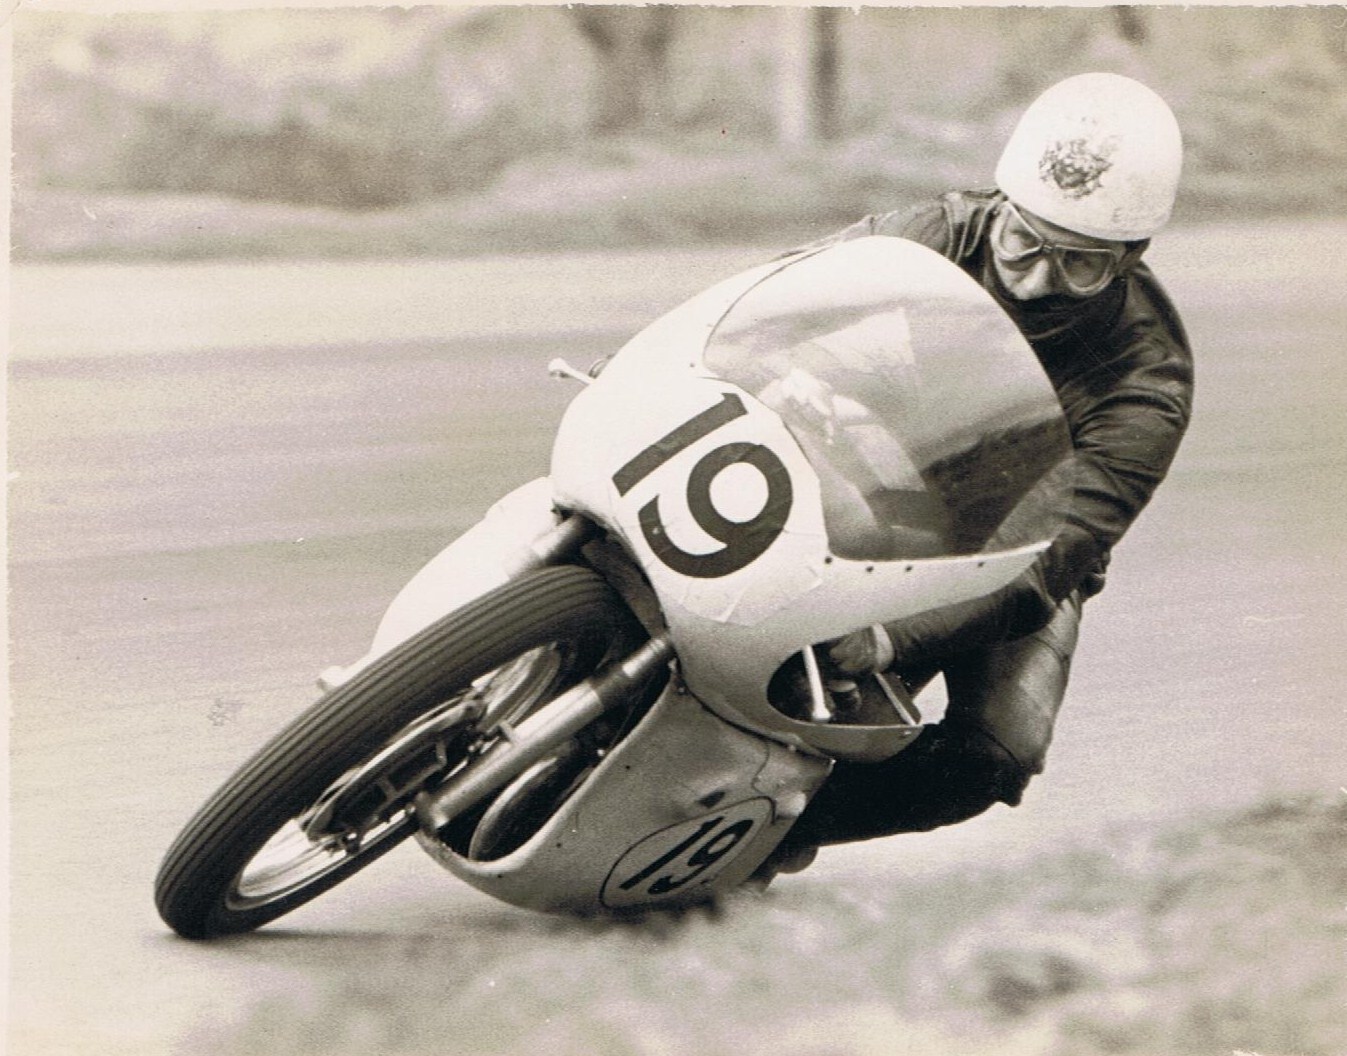 John Hartle, 1963, credit Phil Wain's Family Archive